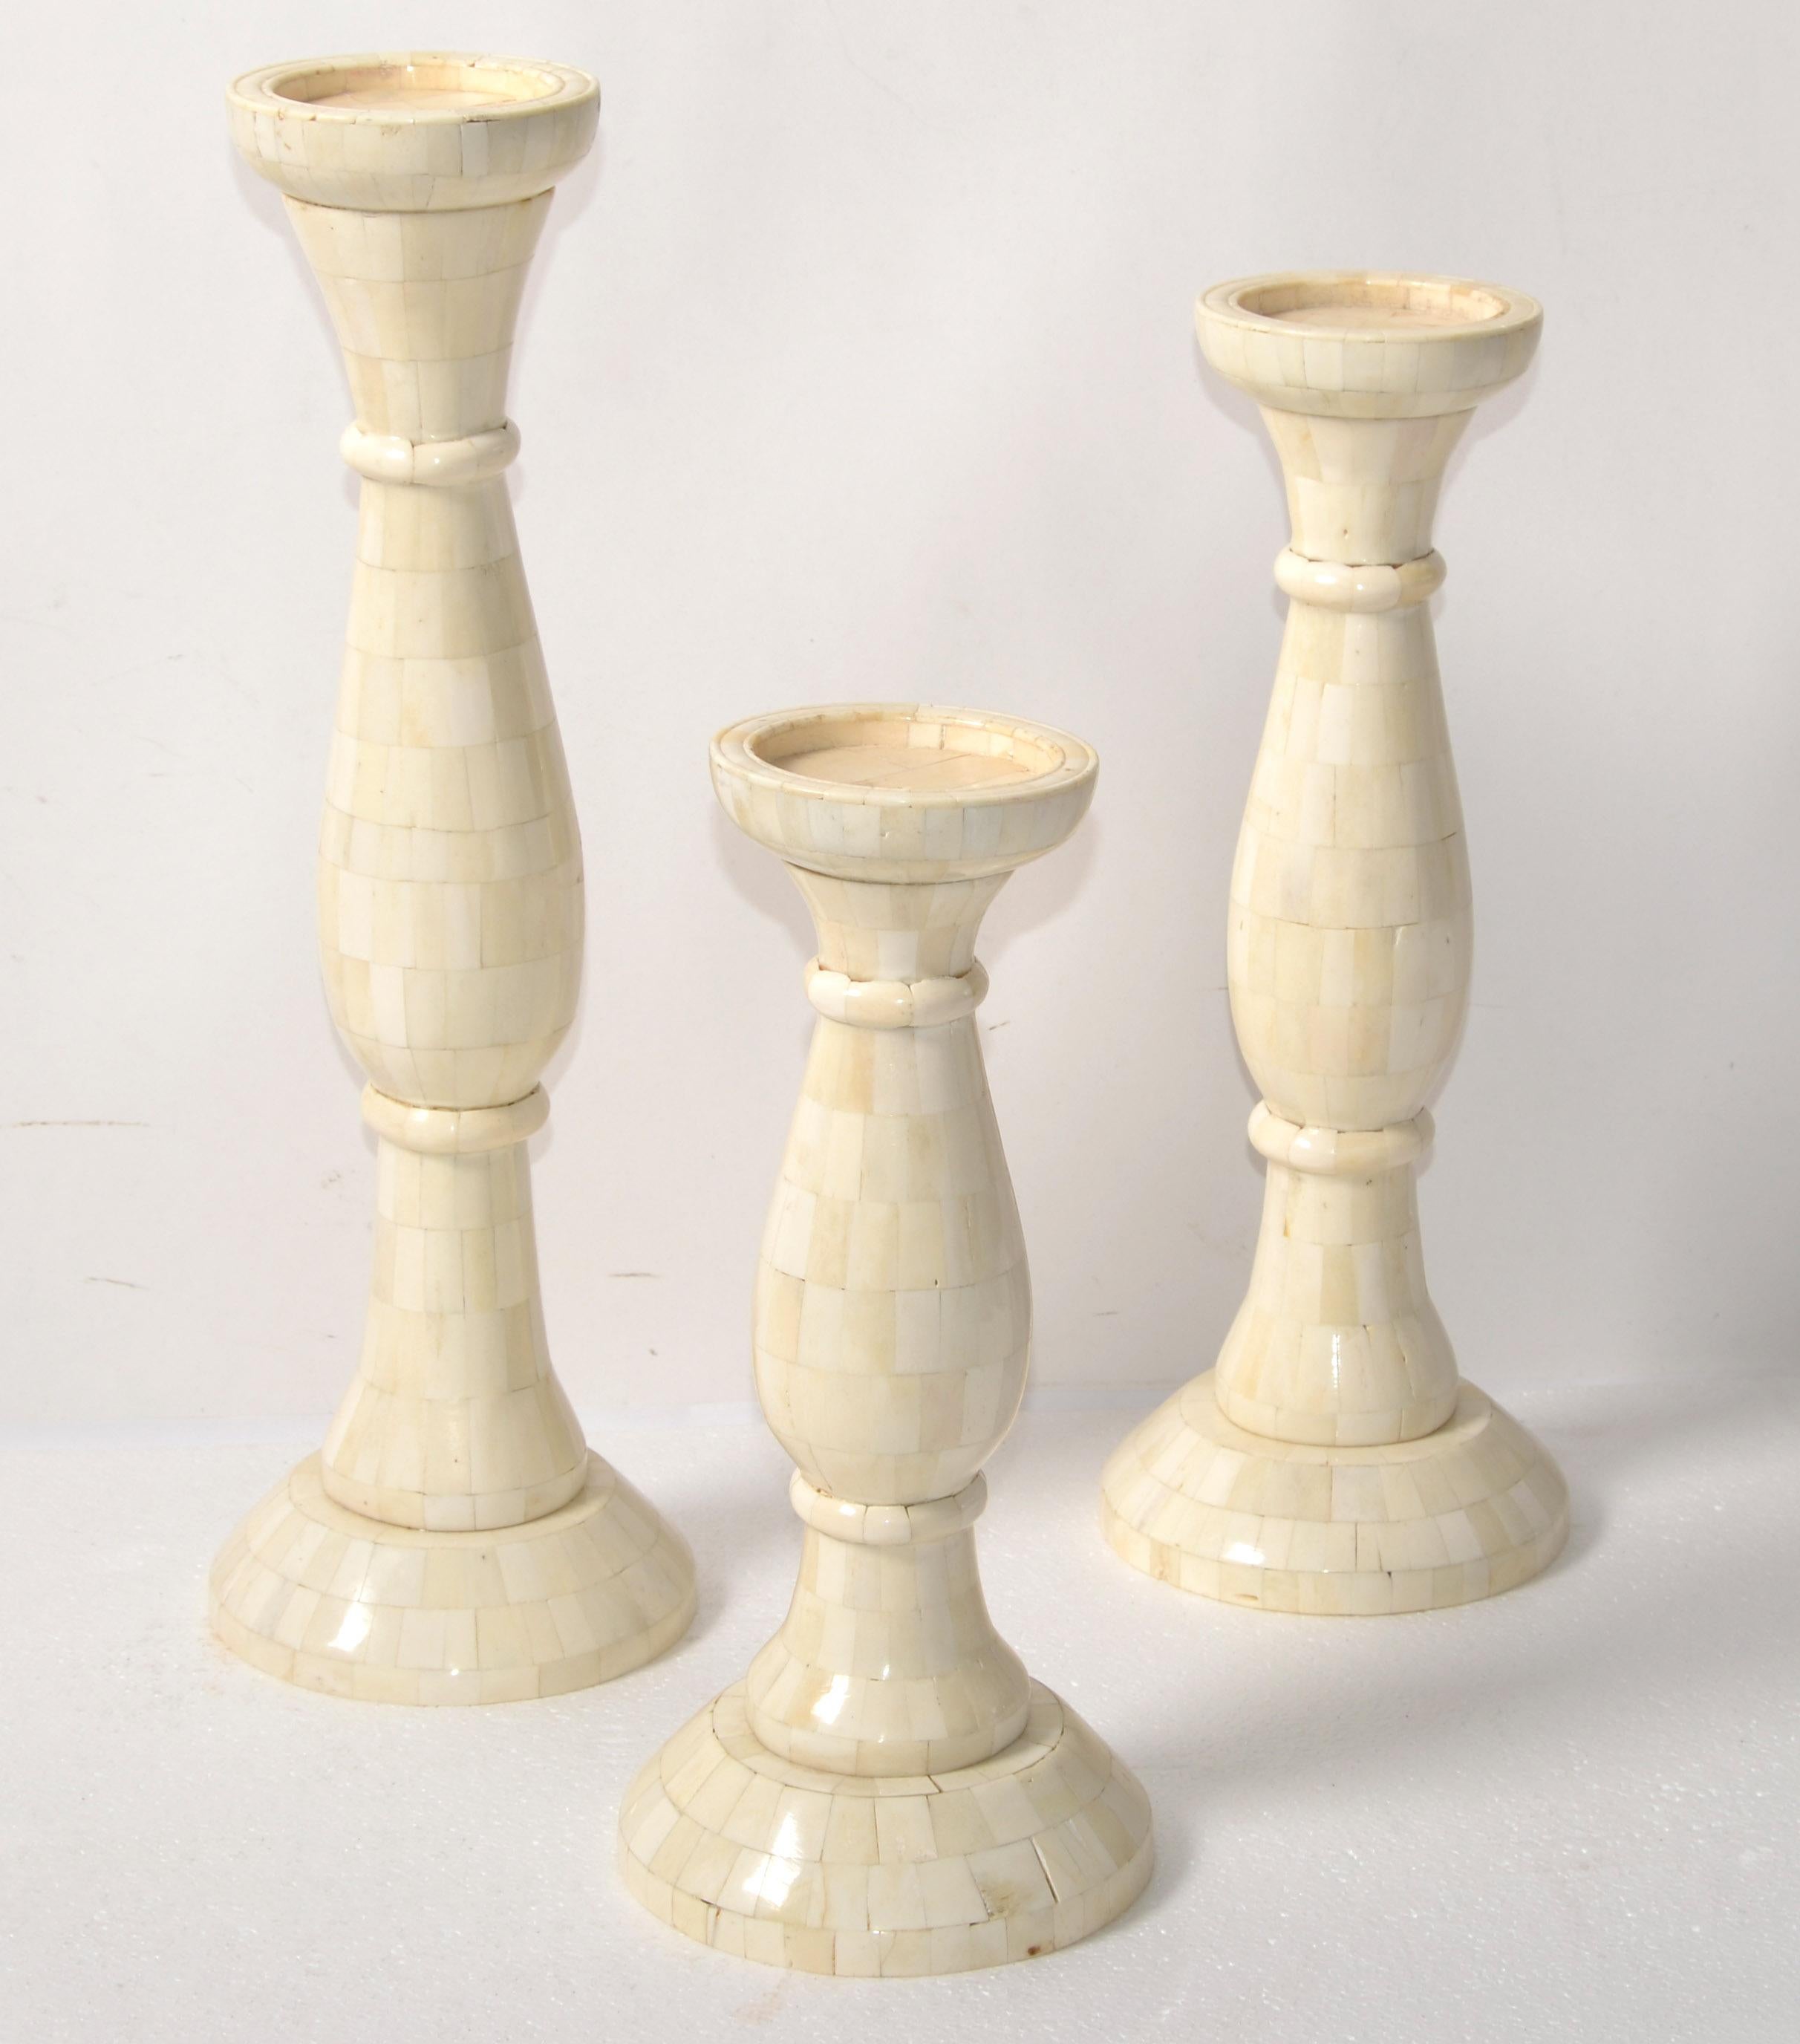 These 3 graduated pillar candle holders are perfect for decorating your fireplace, bedroom, dresser, dining table, kitchen, living room, and more. Besides daily home decoration, this tall candle holder with a rustic look is also the perfect table